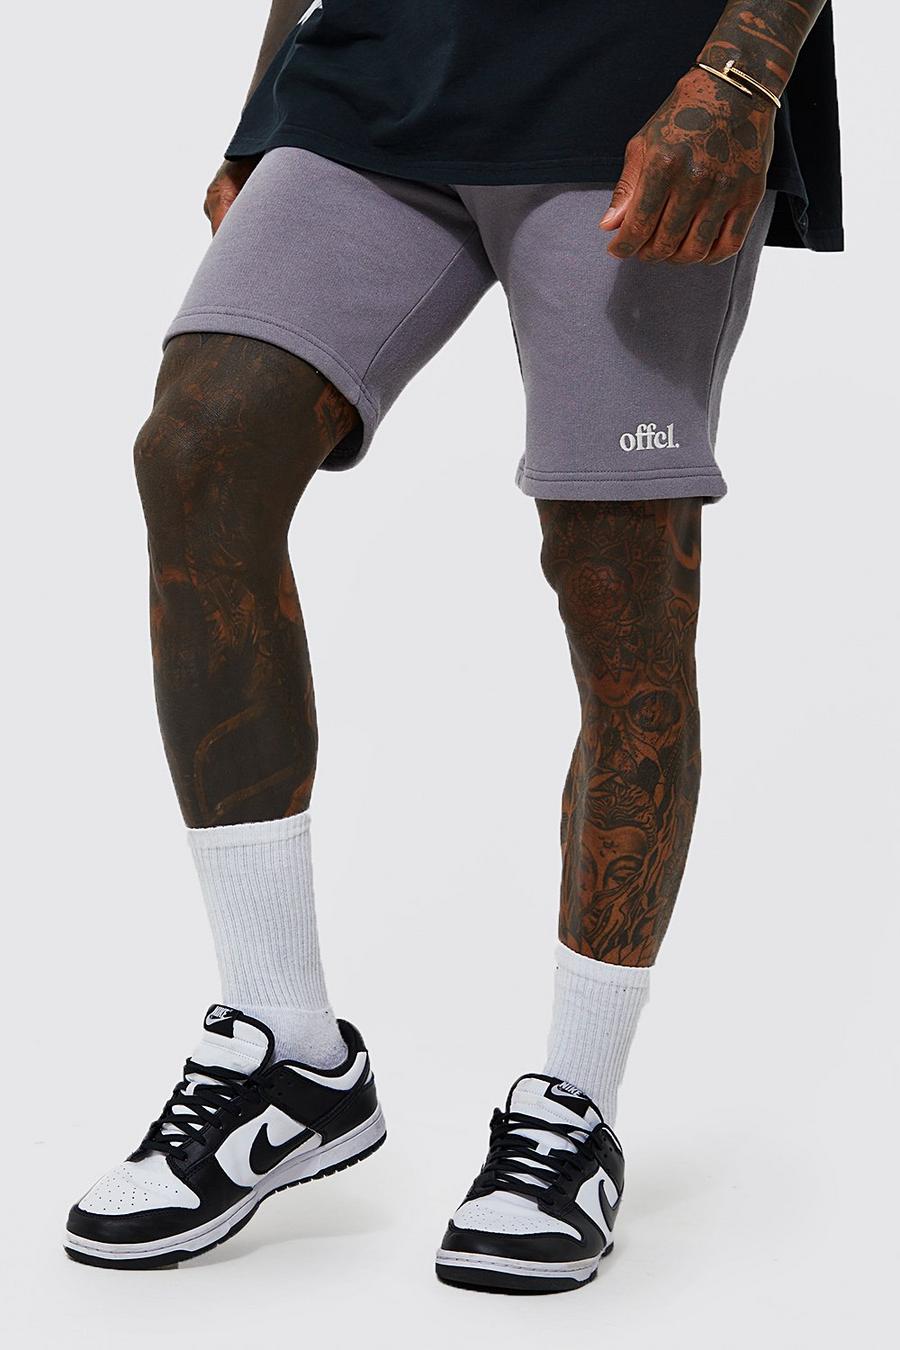 Charcoal Offcl Slim Fit Jersey Shorts image number 1